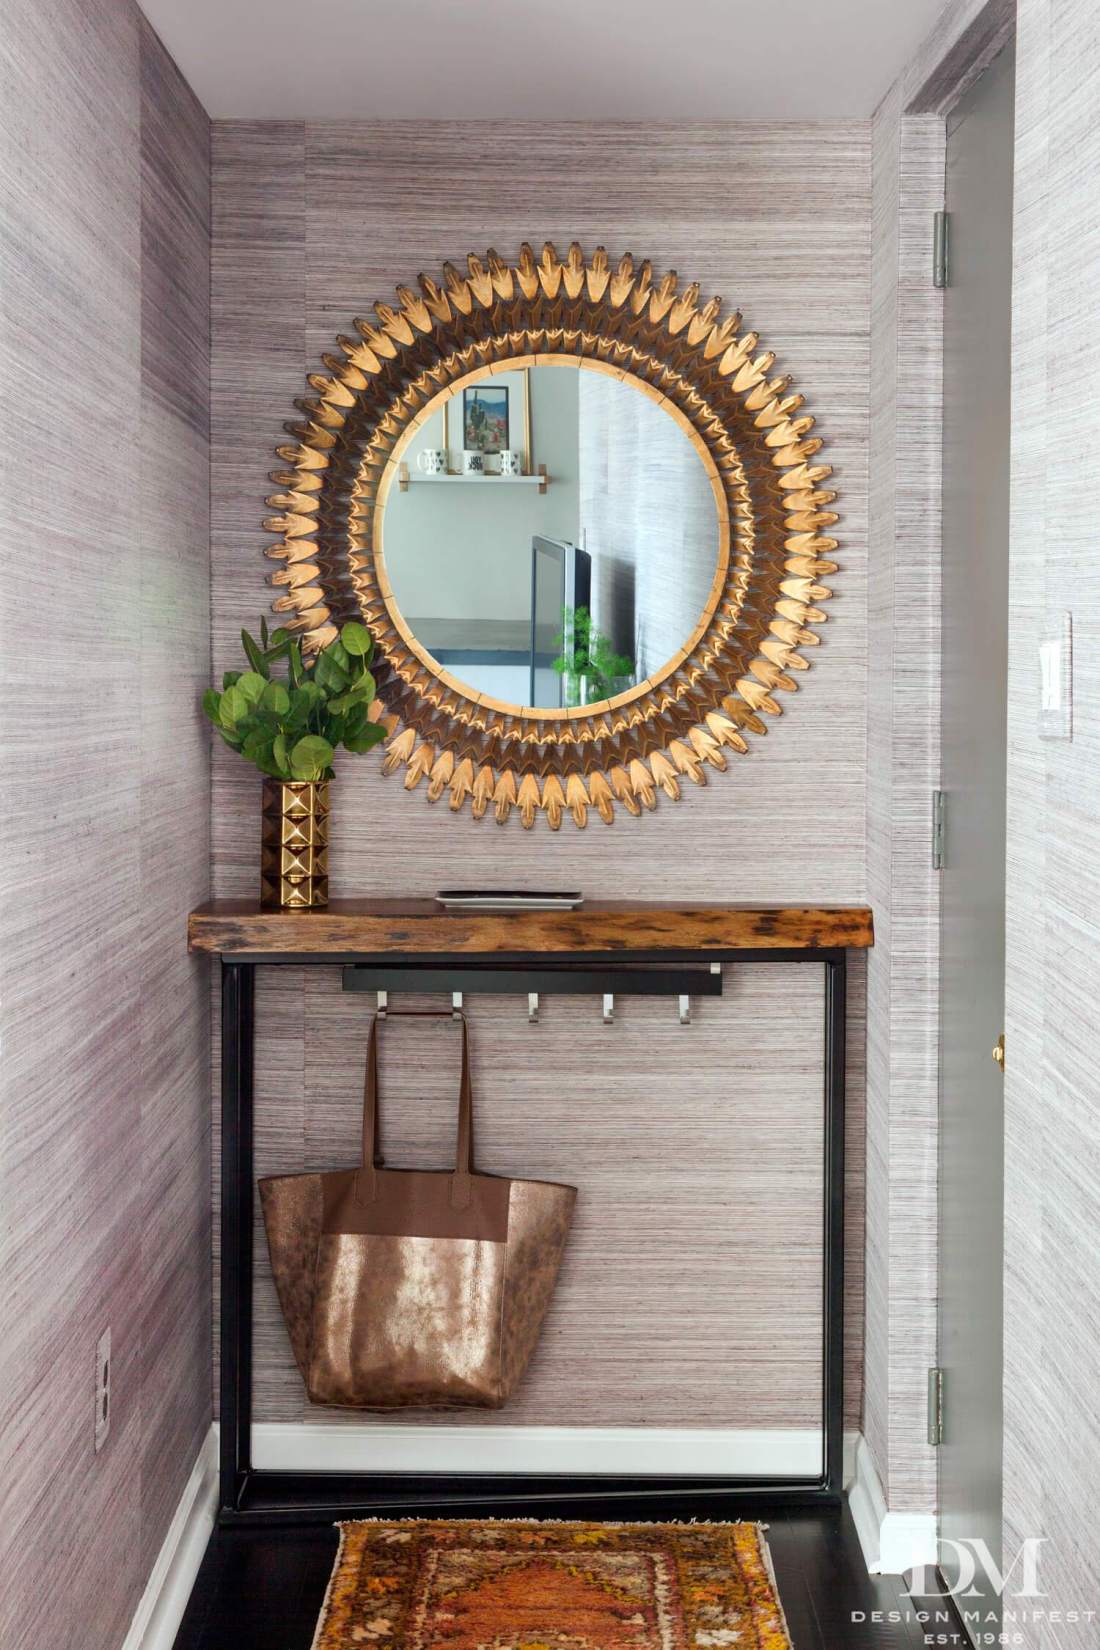 50 Entryway Mirror Decor Ideas to Make the Space Extra Special